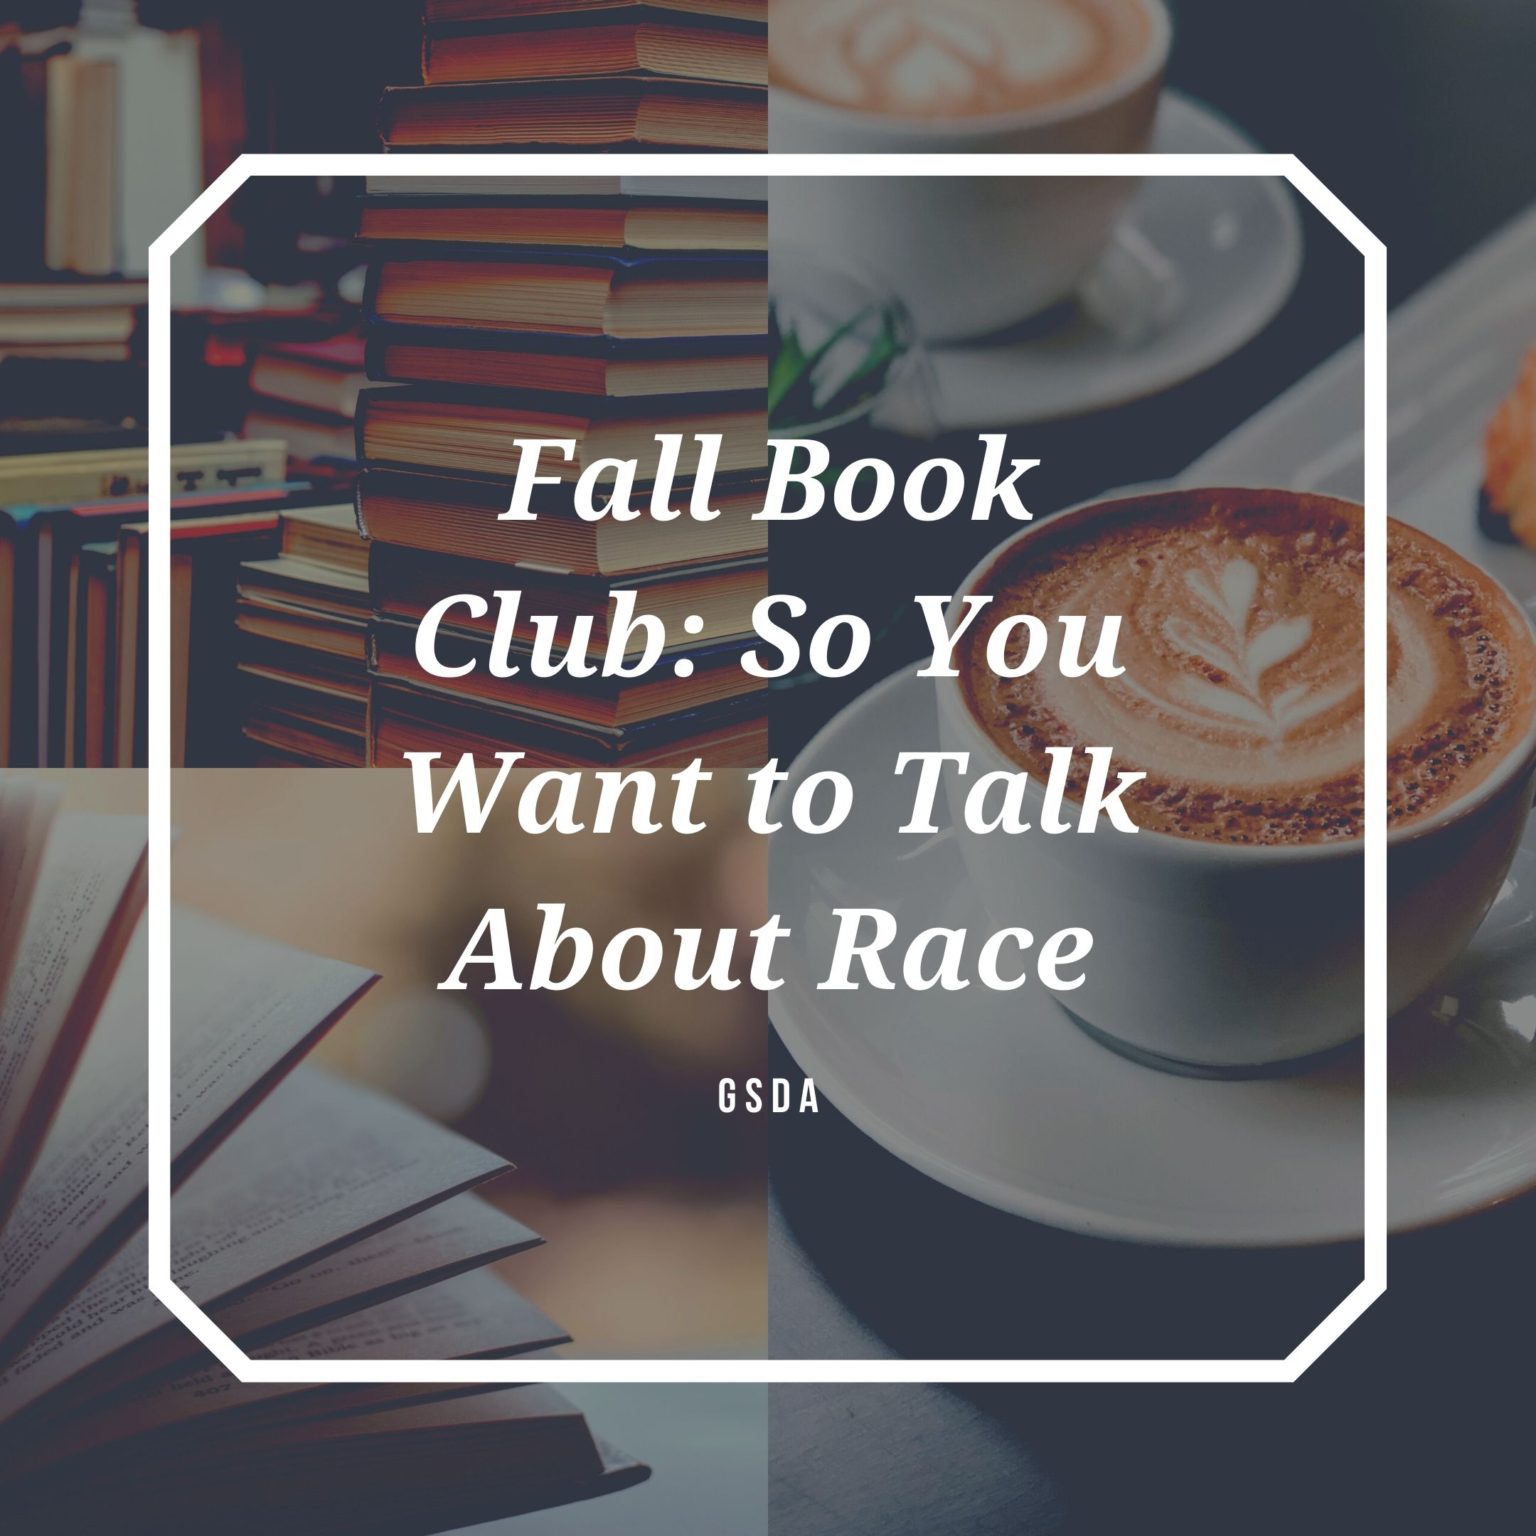 Dinner Discussion Fall Book Club So You Want To Talk About Race?